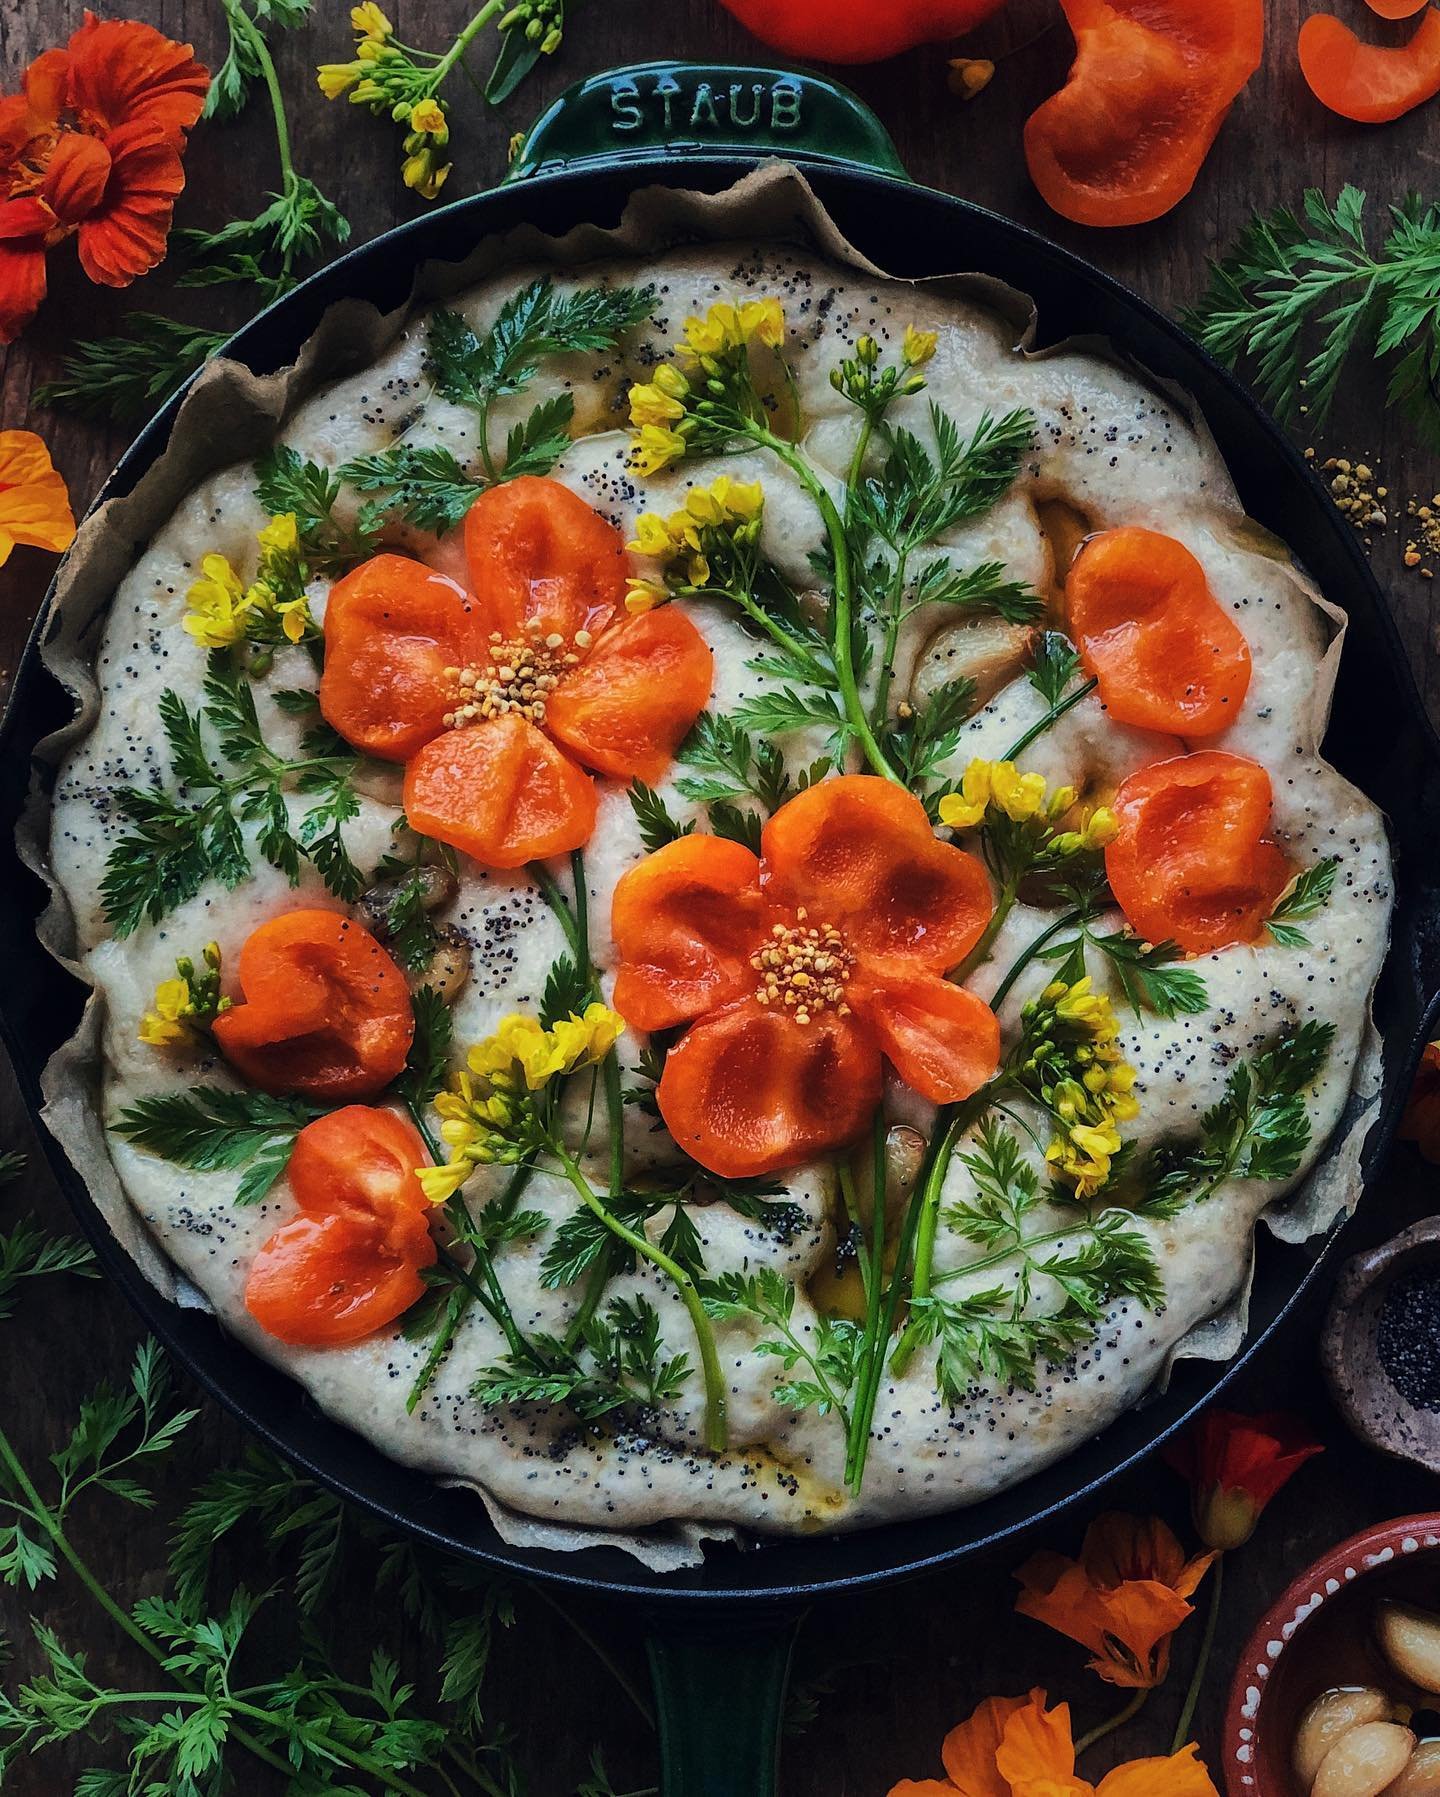 Garlic confit focaccia topped with orange bell peppers, carrot fronds, choy sum flowers, chives, and poppy seeds. ⁣
⁣
At this time of year, wild California poppies are popping up everywhere in the green spaces in my neighborhood. I am always tempted 